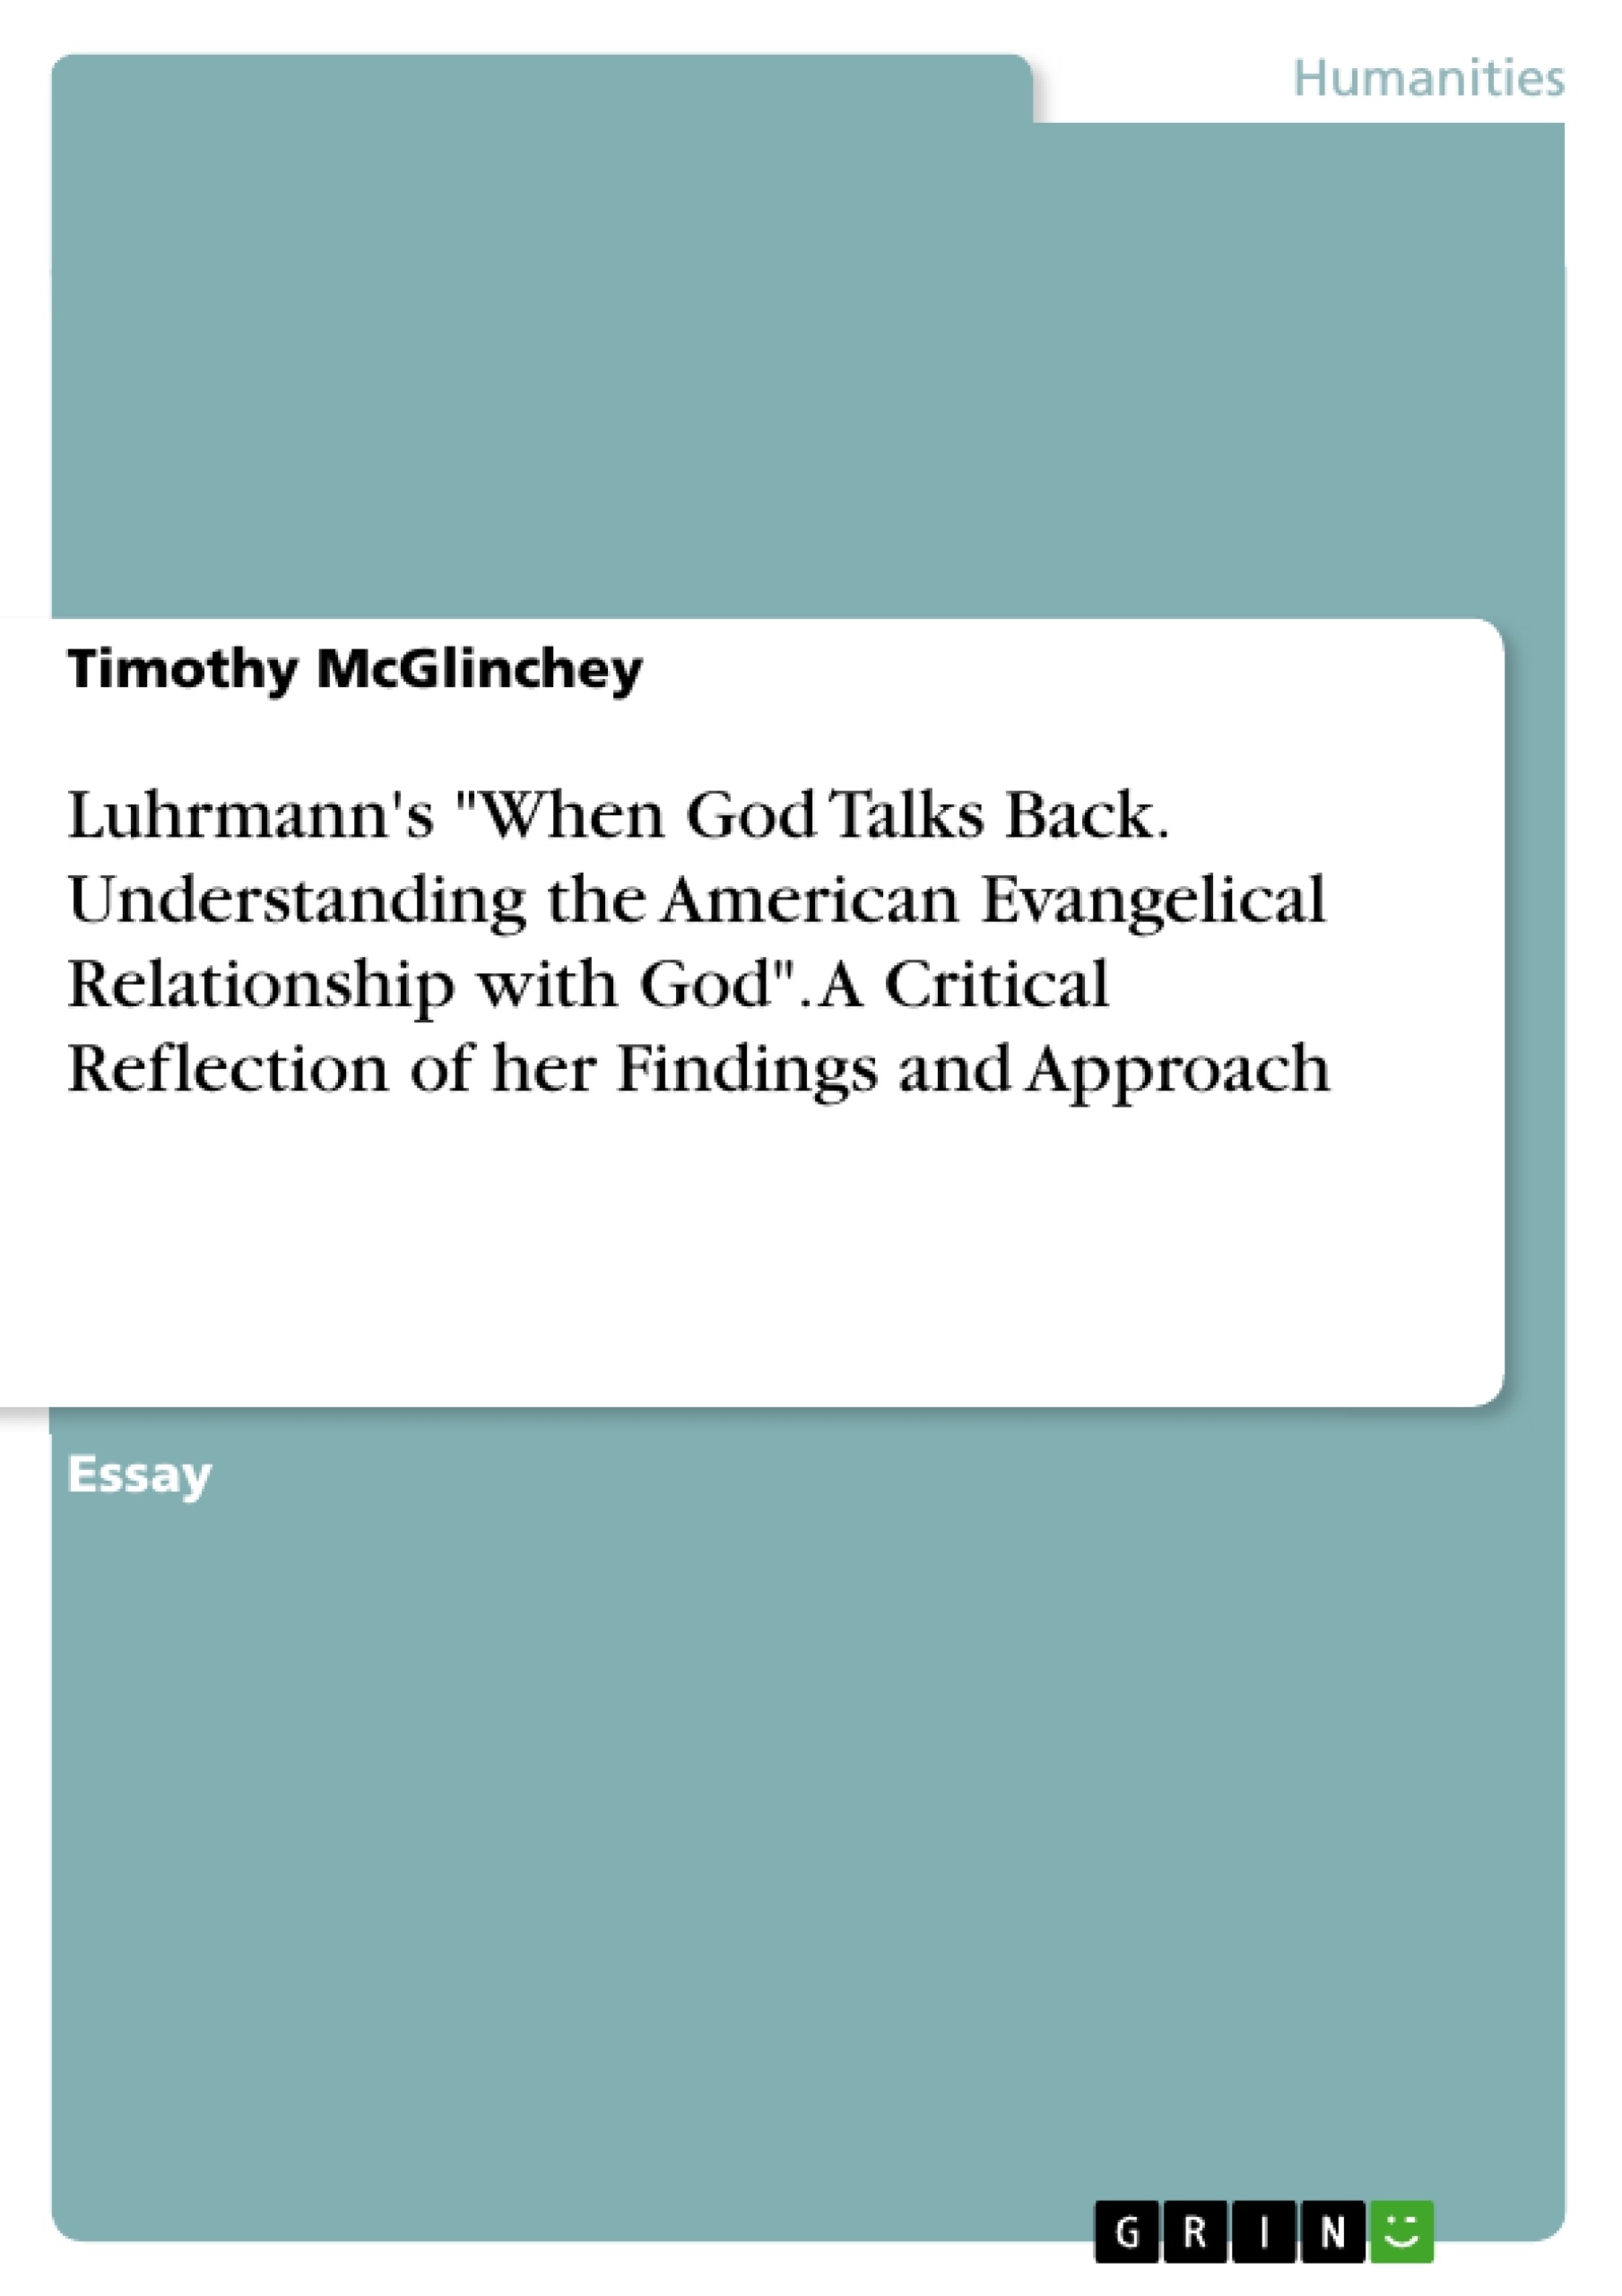 Título: Luhrmann's "When God Talks Back. Understanding the American Evangelical Relationship with God". A Critical Reflection of her Findings and Approach